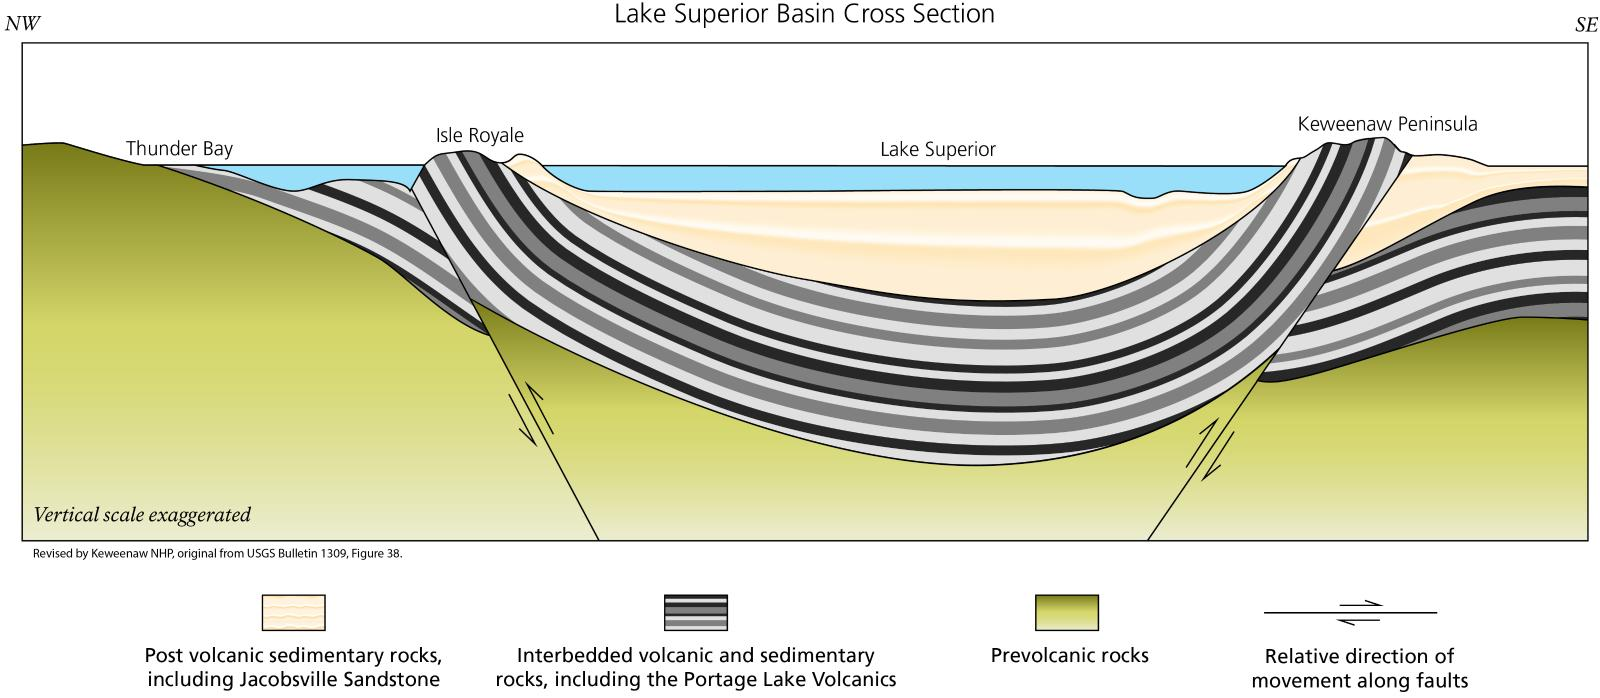 [2:42 PM] Clark, Nicholas J Cross sectional illustration showing rock types. Volcanic and sedimentary rocks form a bowl shape, with Isle Royale and the Keweenaw being opposite rims of the bowl. A thin sky-blue band fills the top of the bowl.